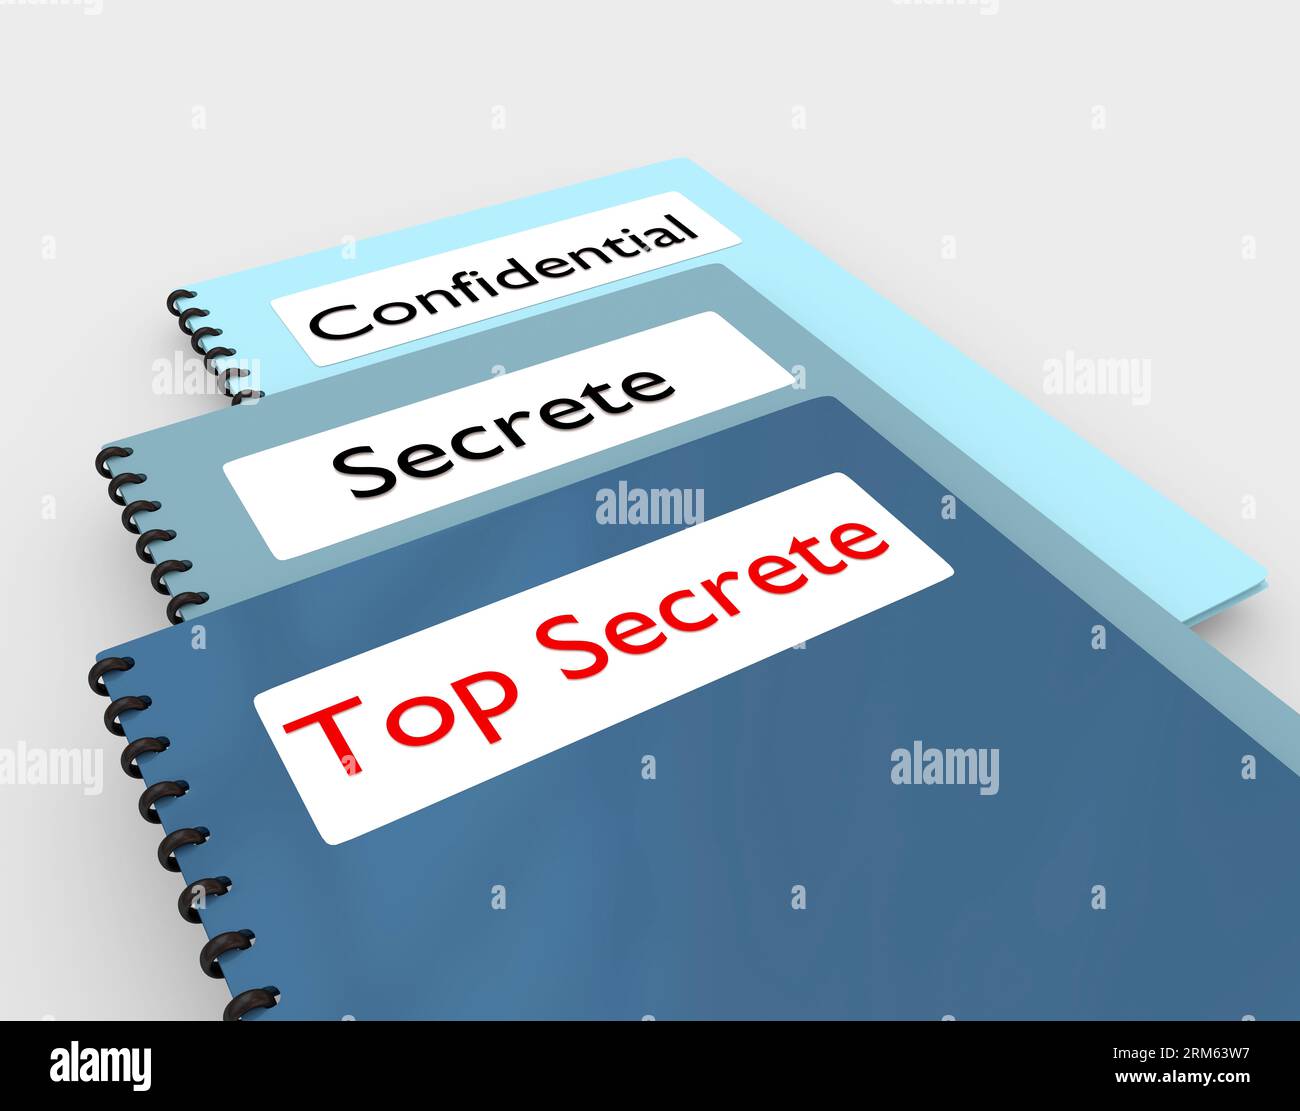 3D illustration of three booklets titled as Top Secrete, Secrete and Confidential - isolated on gray. Stock Photo